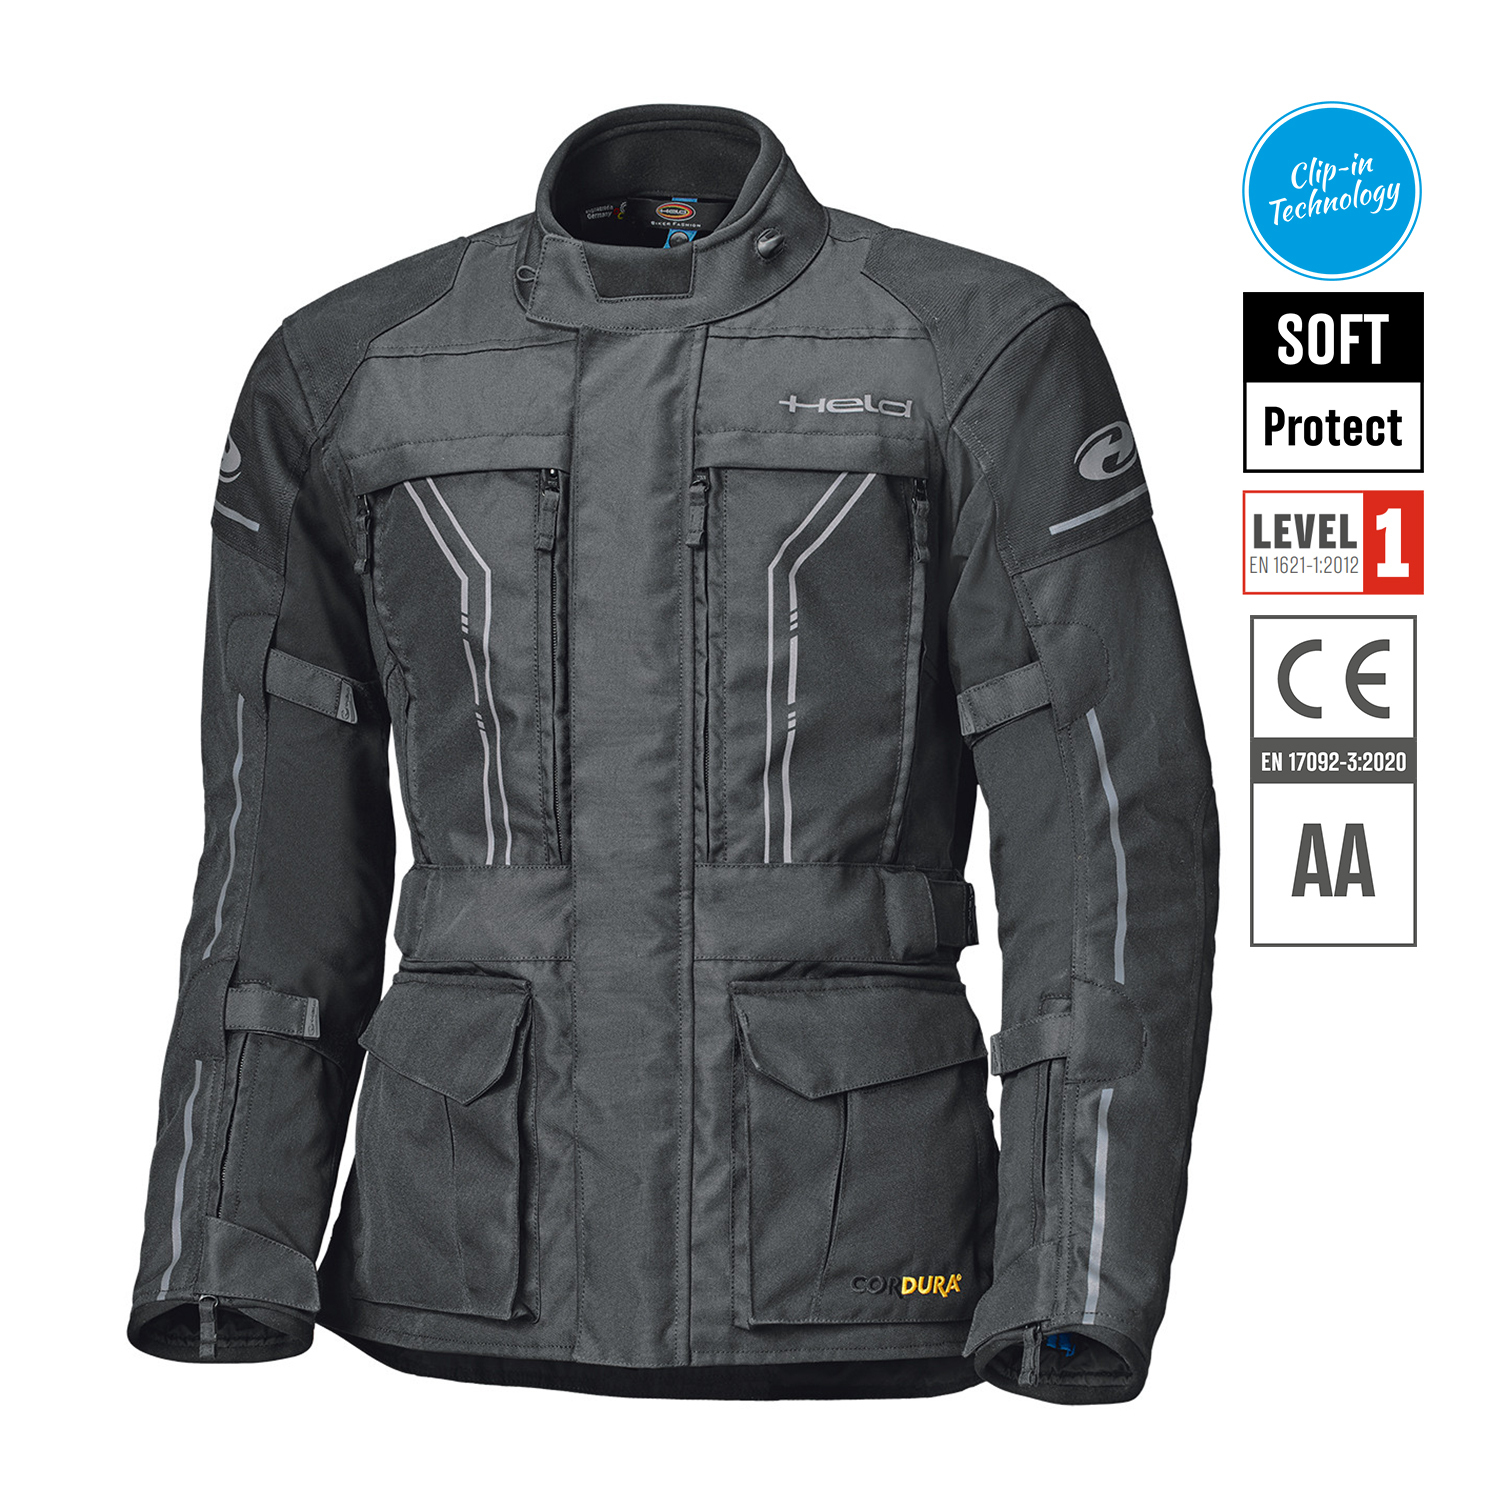 Held Pentland Jacket Black - Available in Various Sizes